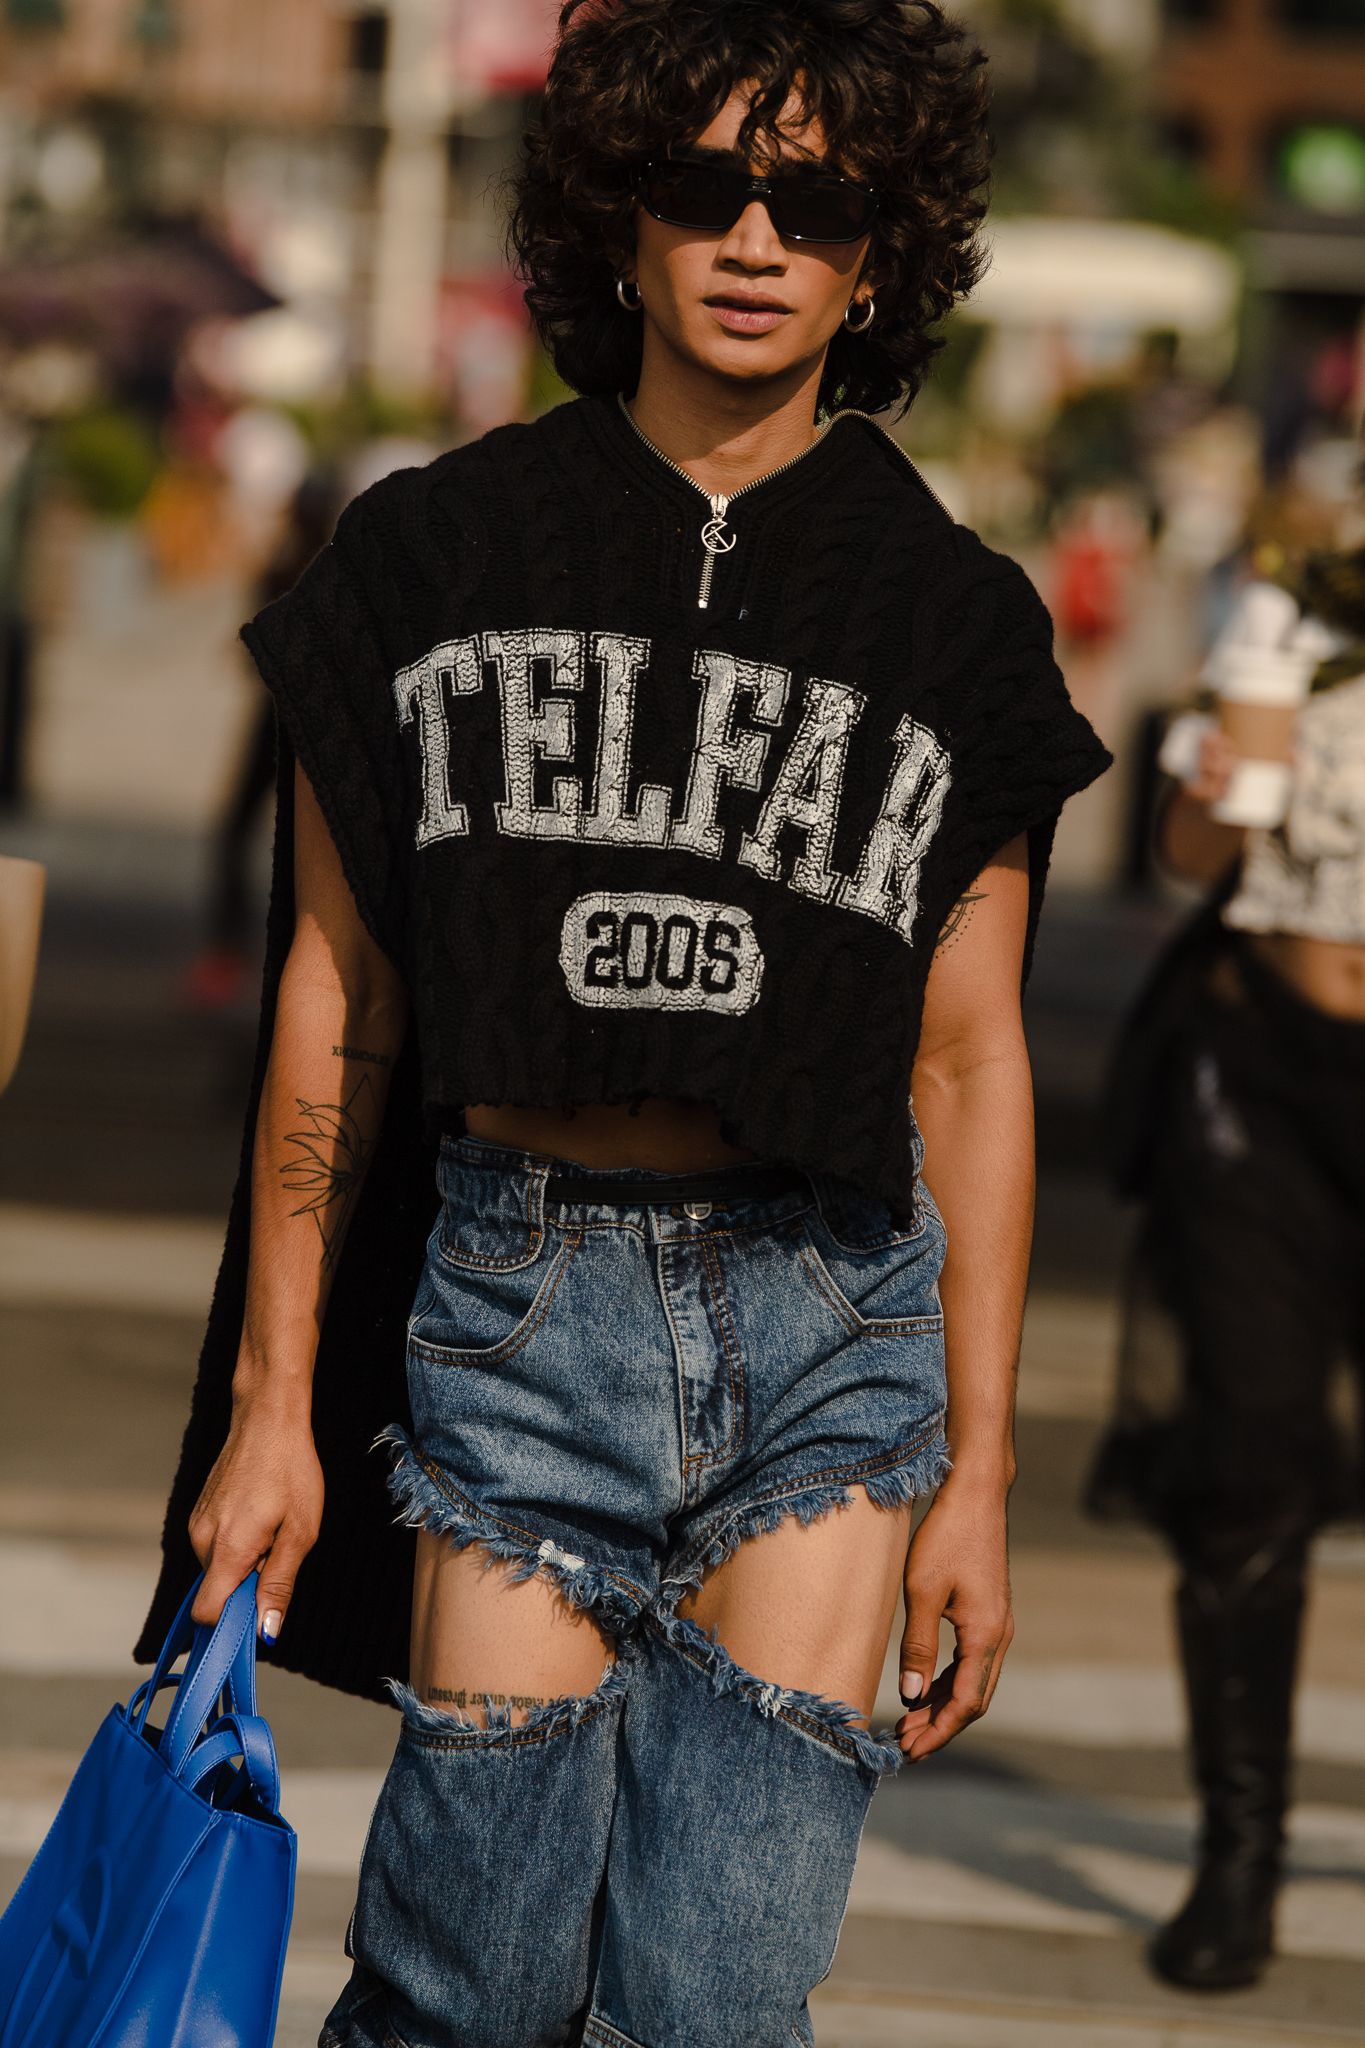 Street Style- Looks from My New York City Trip